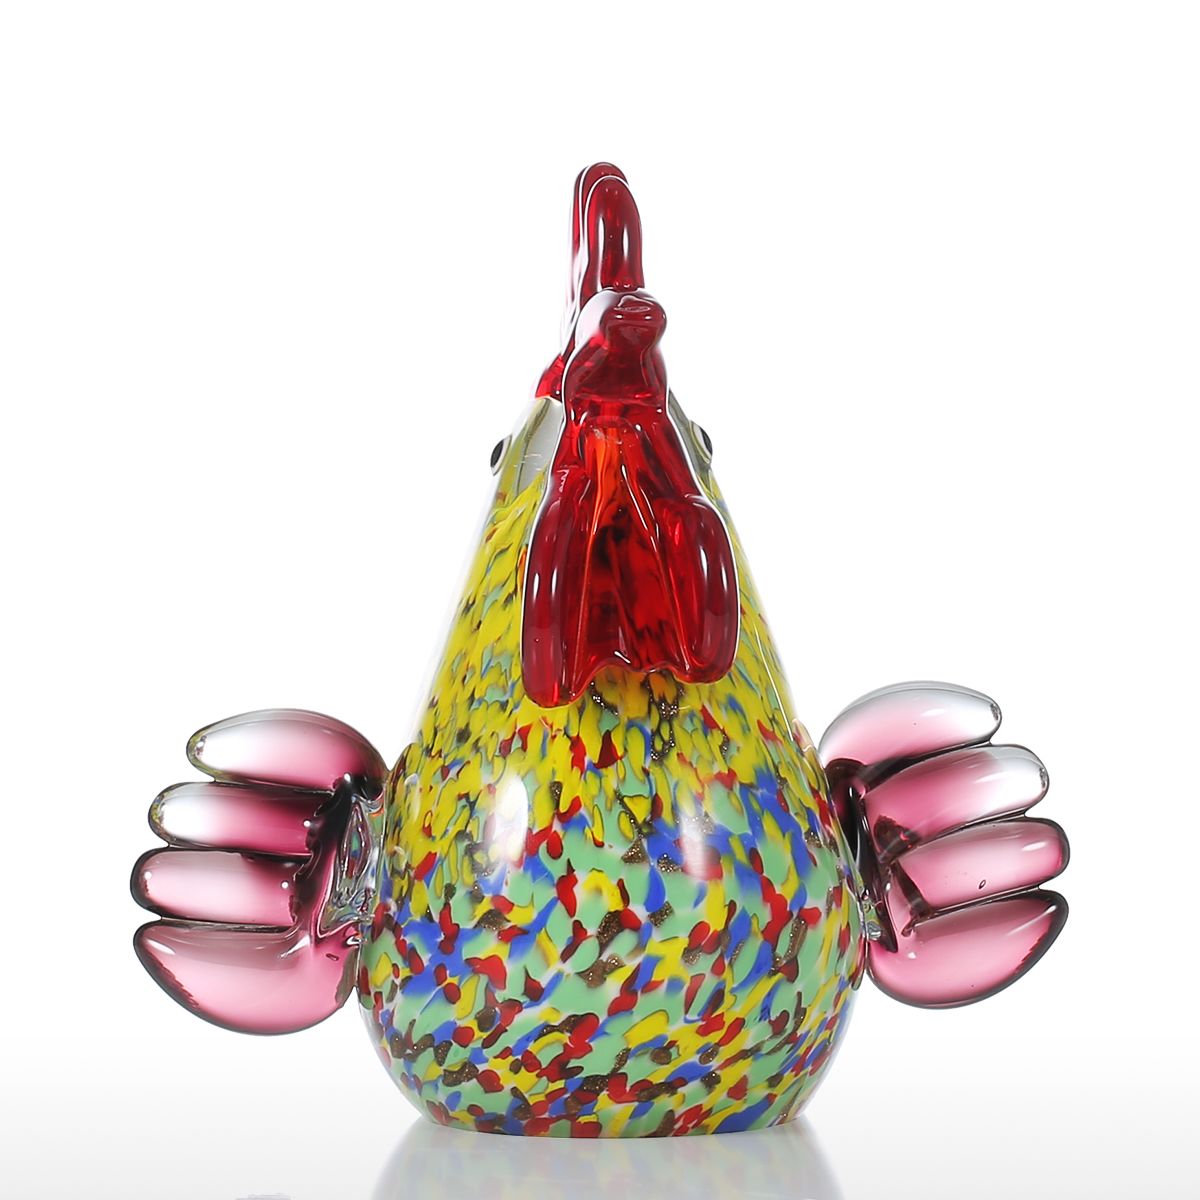 Rooster Kitchen Decor and Chicken Decor with Blown Glass for Glass Christmas Ornaments and Thanksgiving Gifts